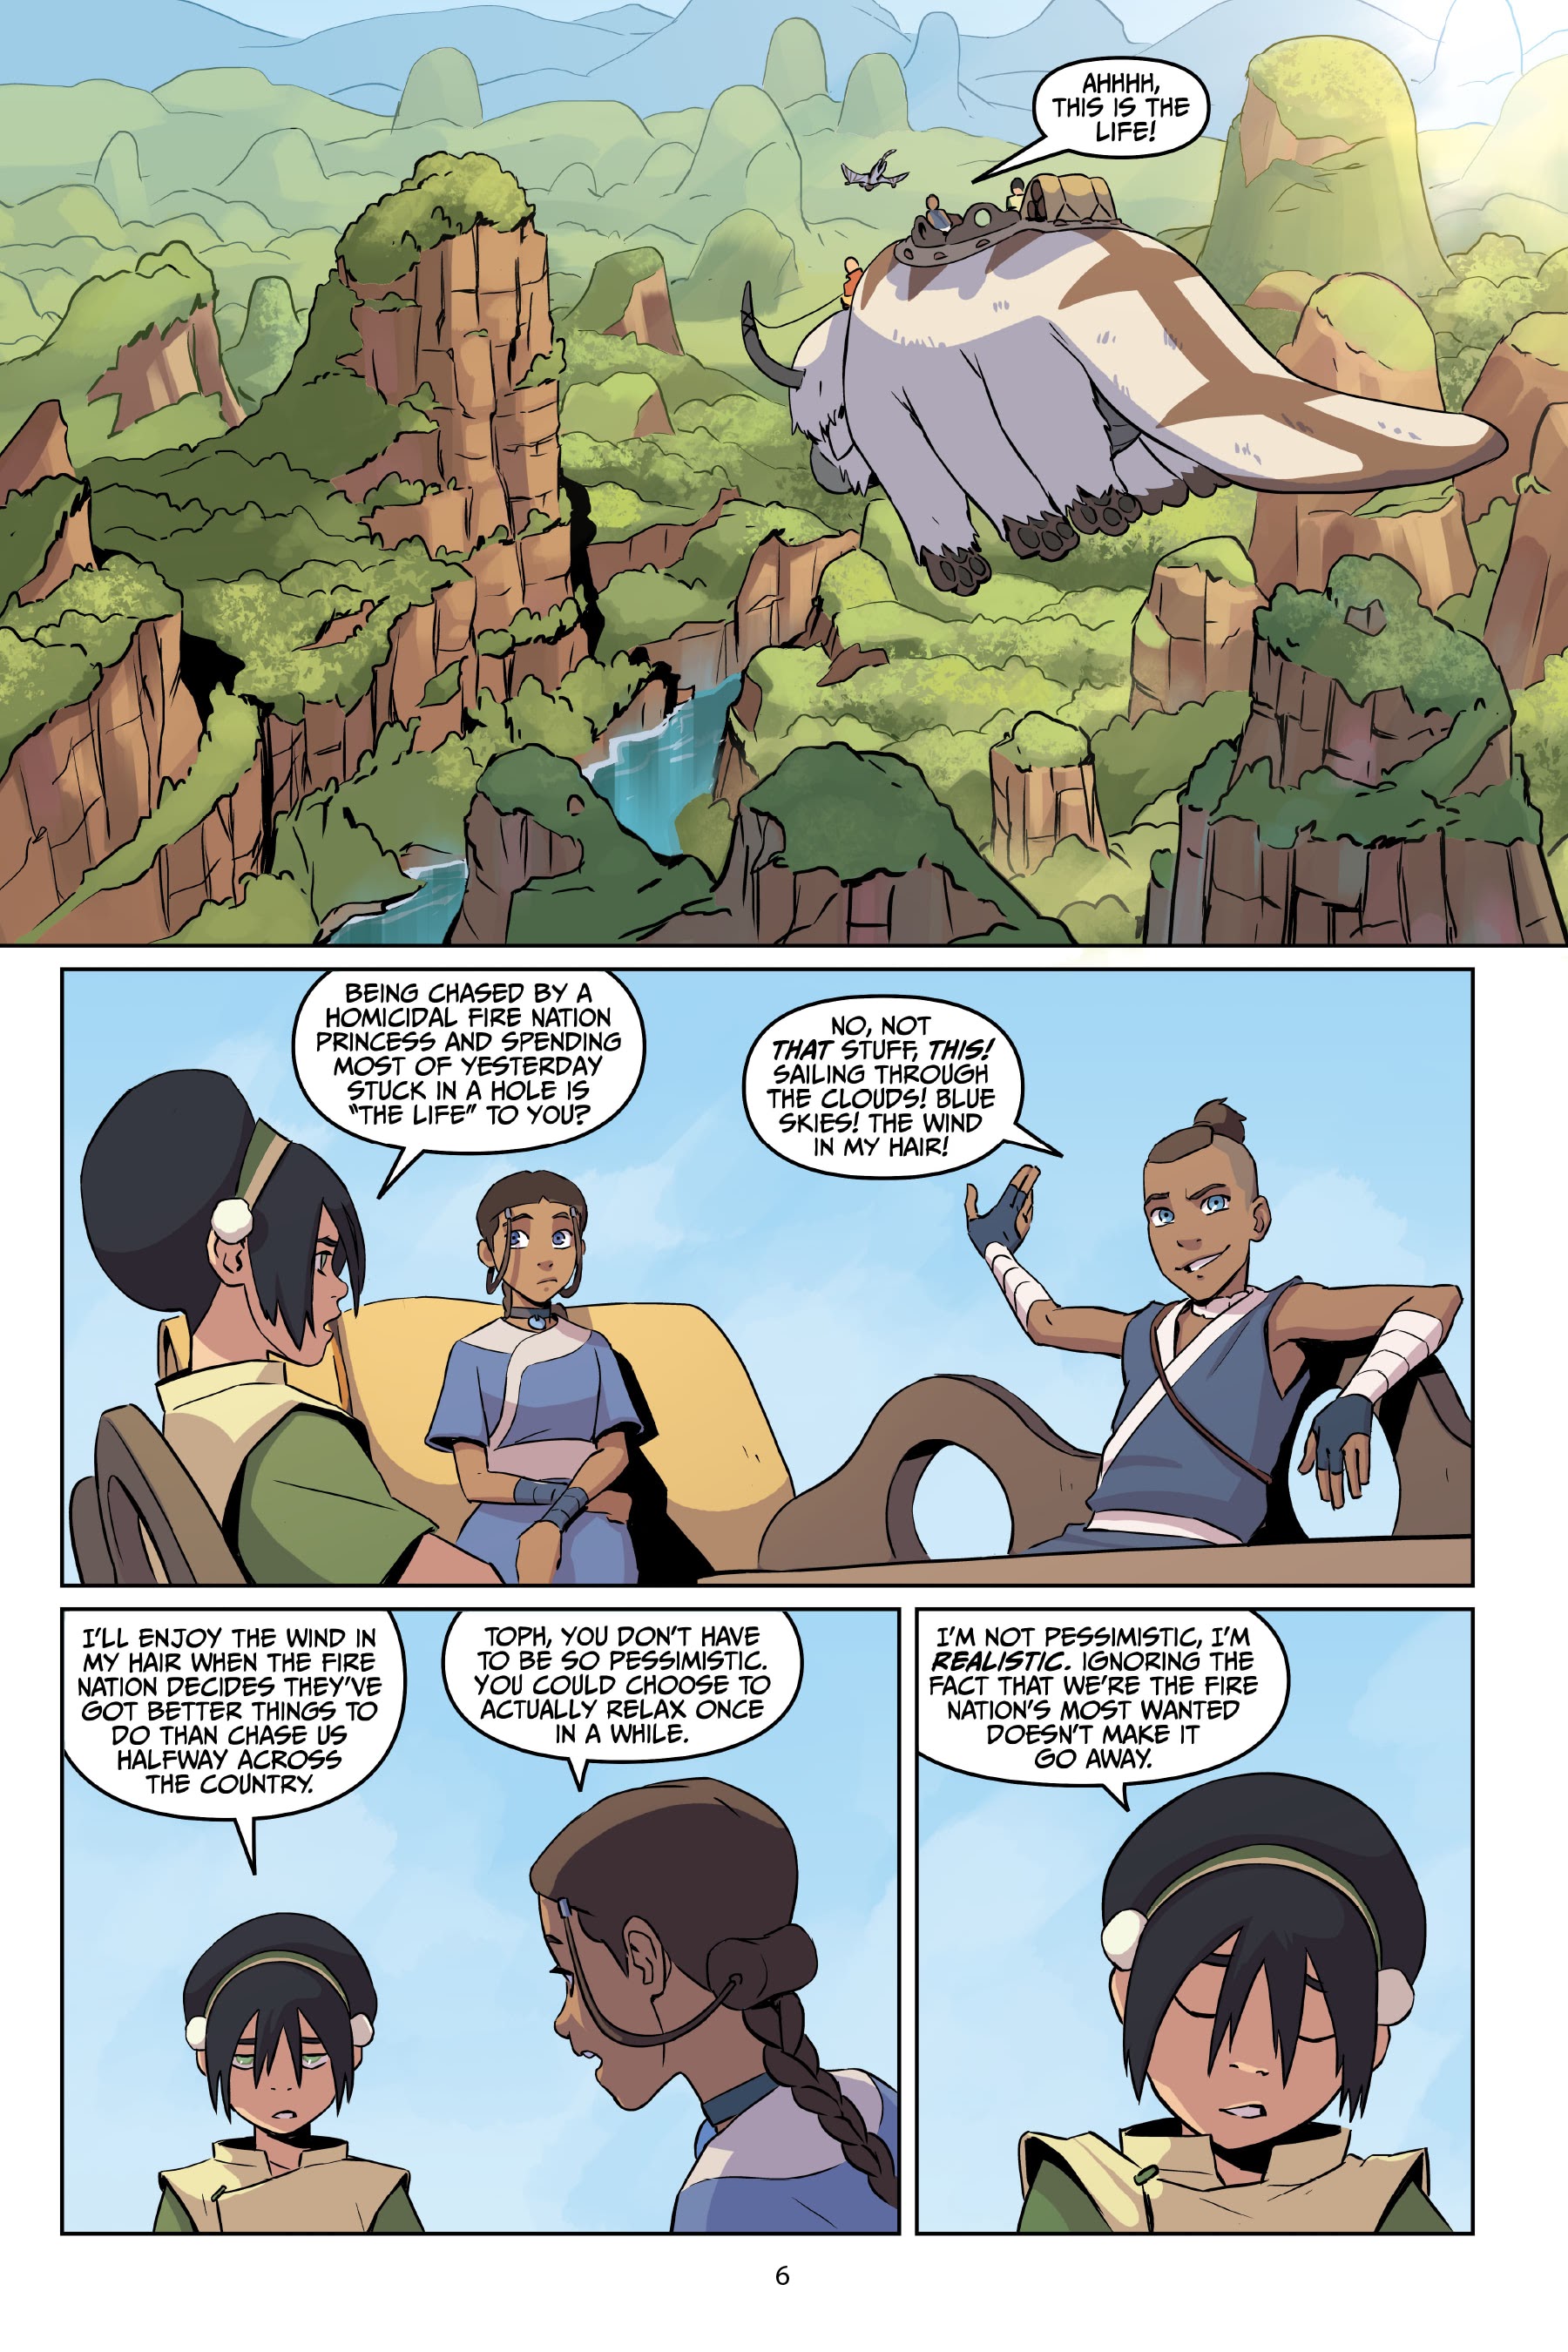 Read online Avatar: The Last Airbender—Katara and the Pirate's Silver comic -  Issue # TPB - 7